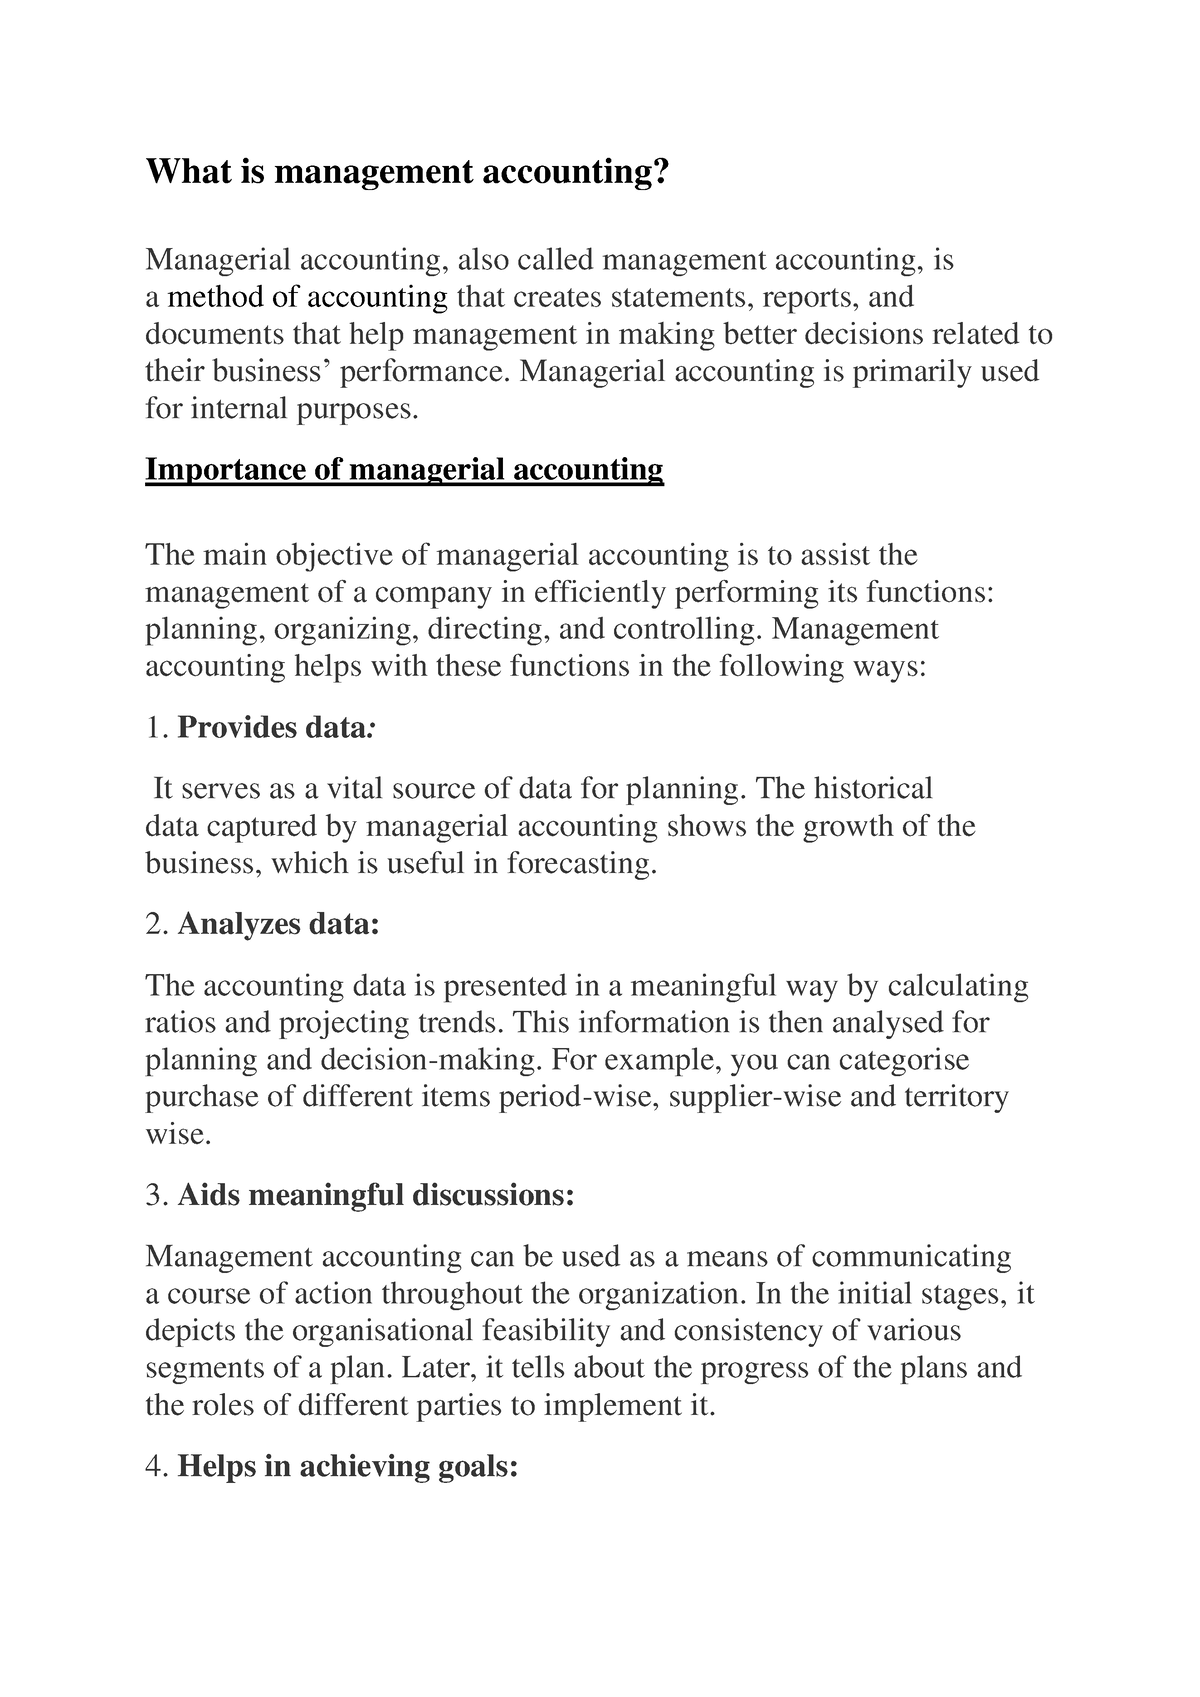 managerial accounting definition essay